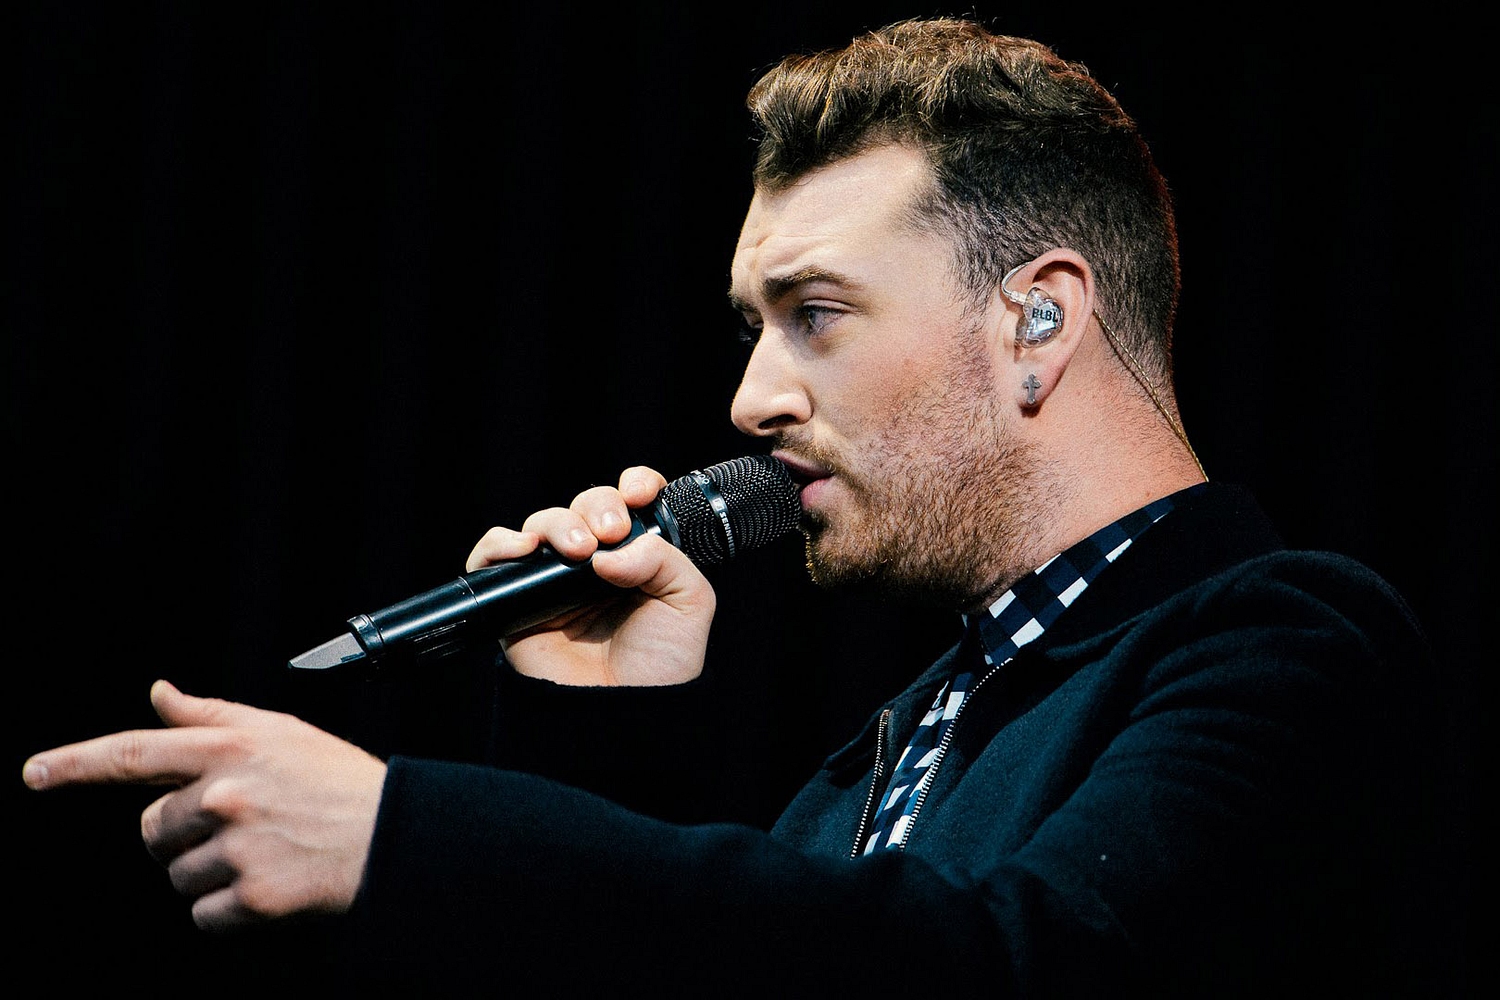 Watch Sam Smith bring ‘Lay Me Down’ to T in the Park